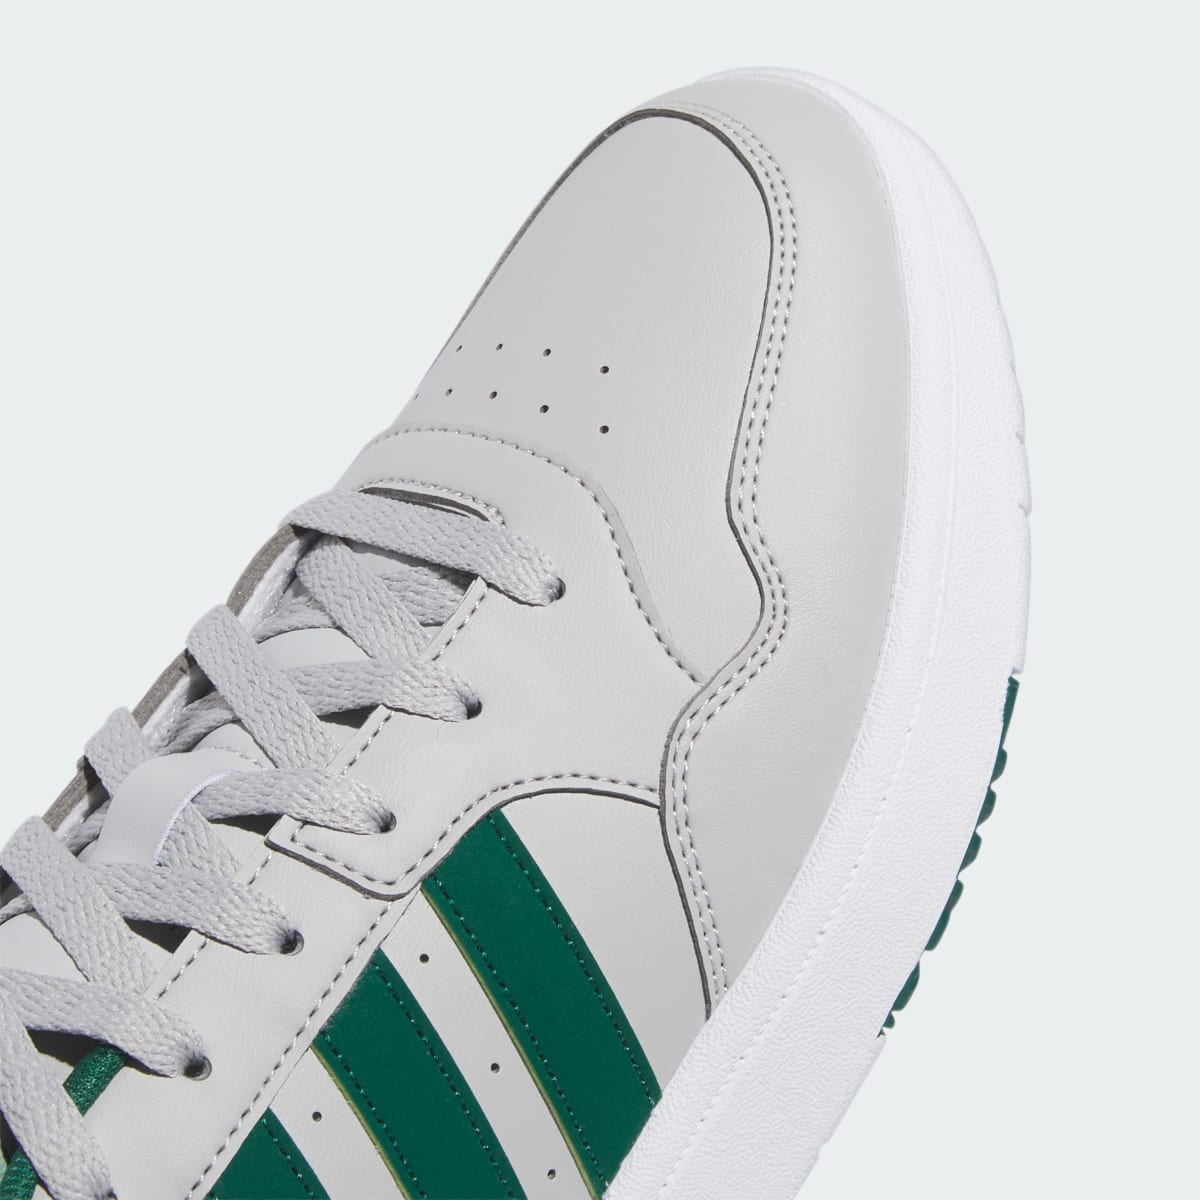 Adidas Hoops 3.0 Low Classic Vintage Shoes. 9